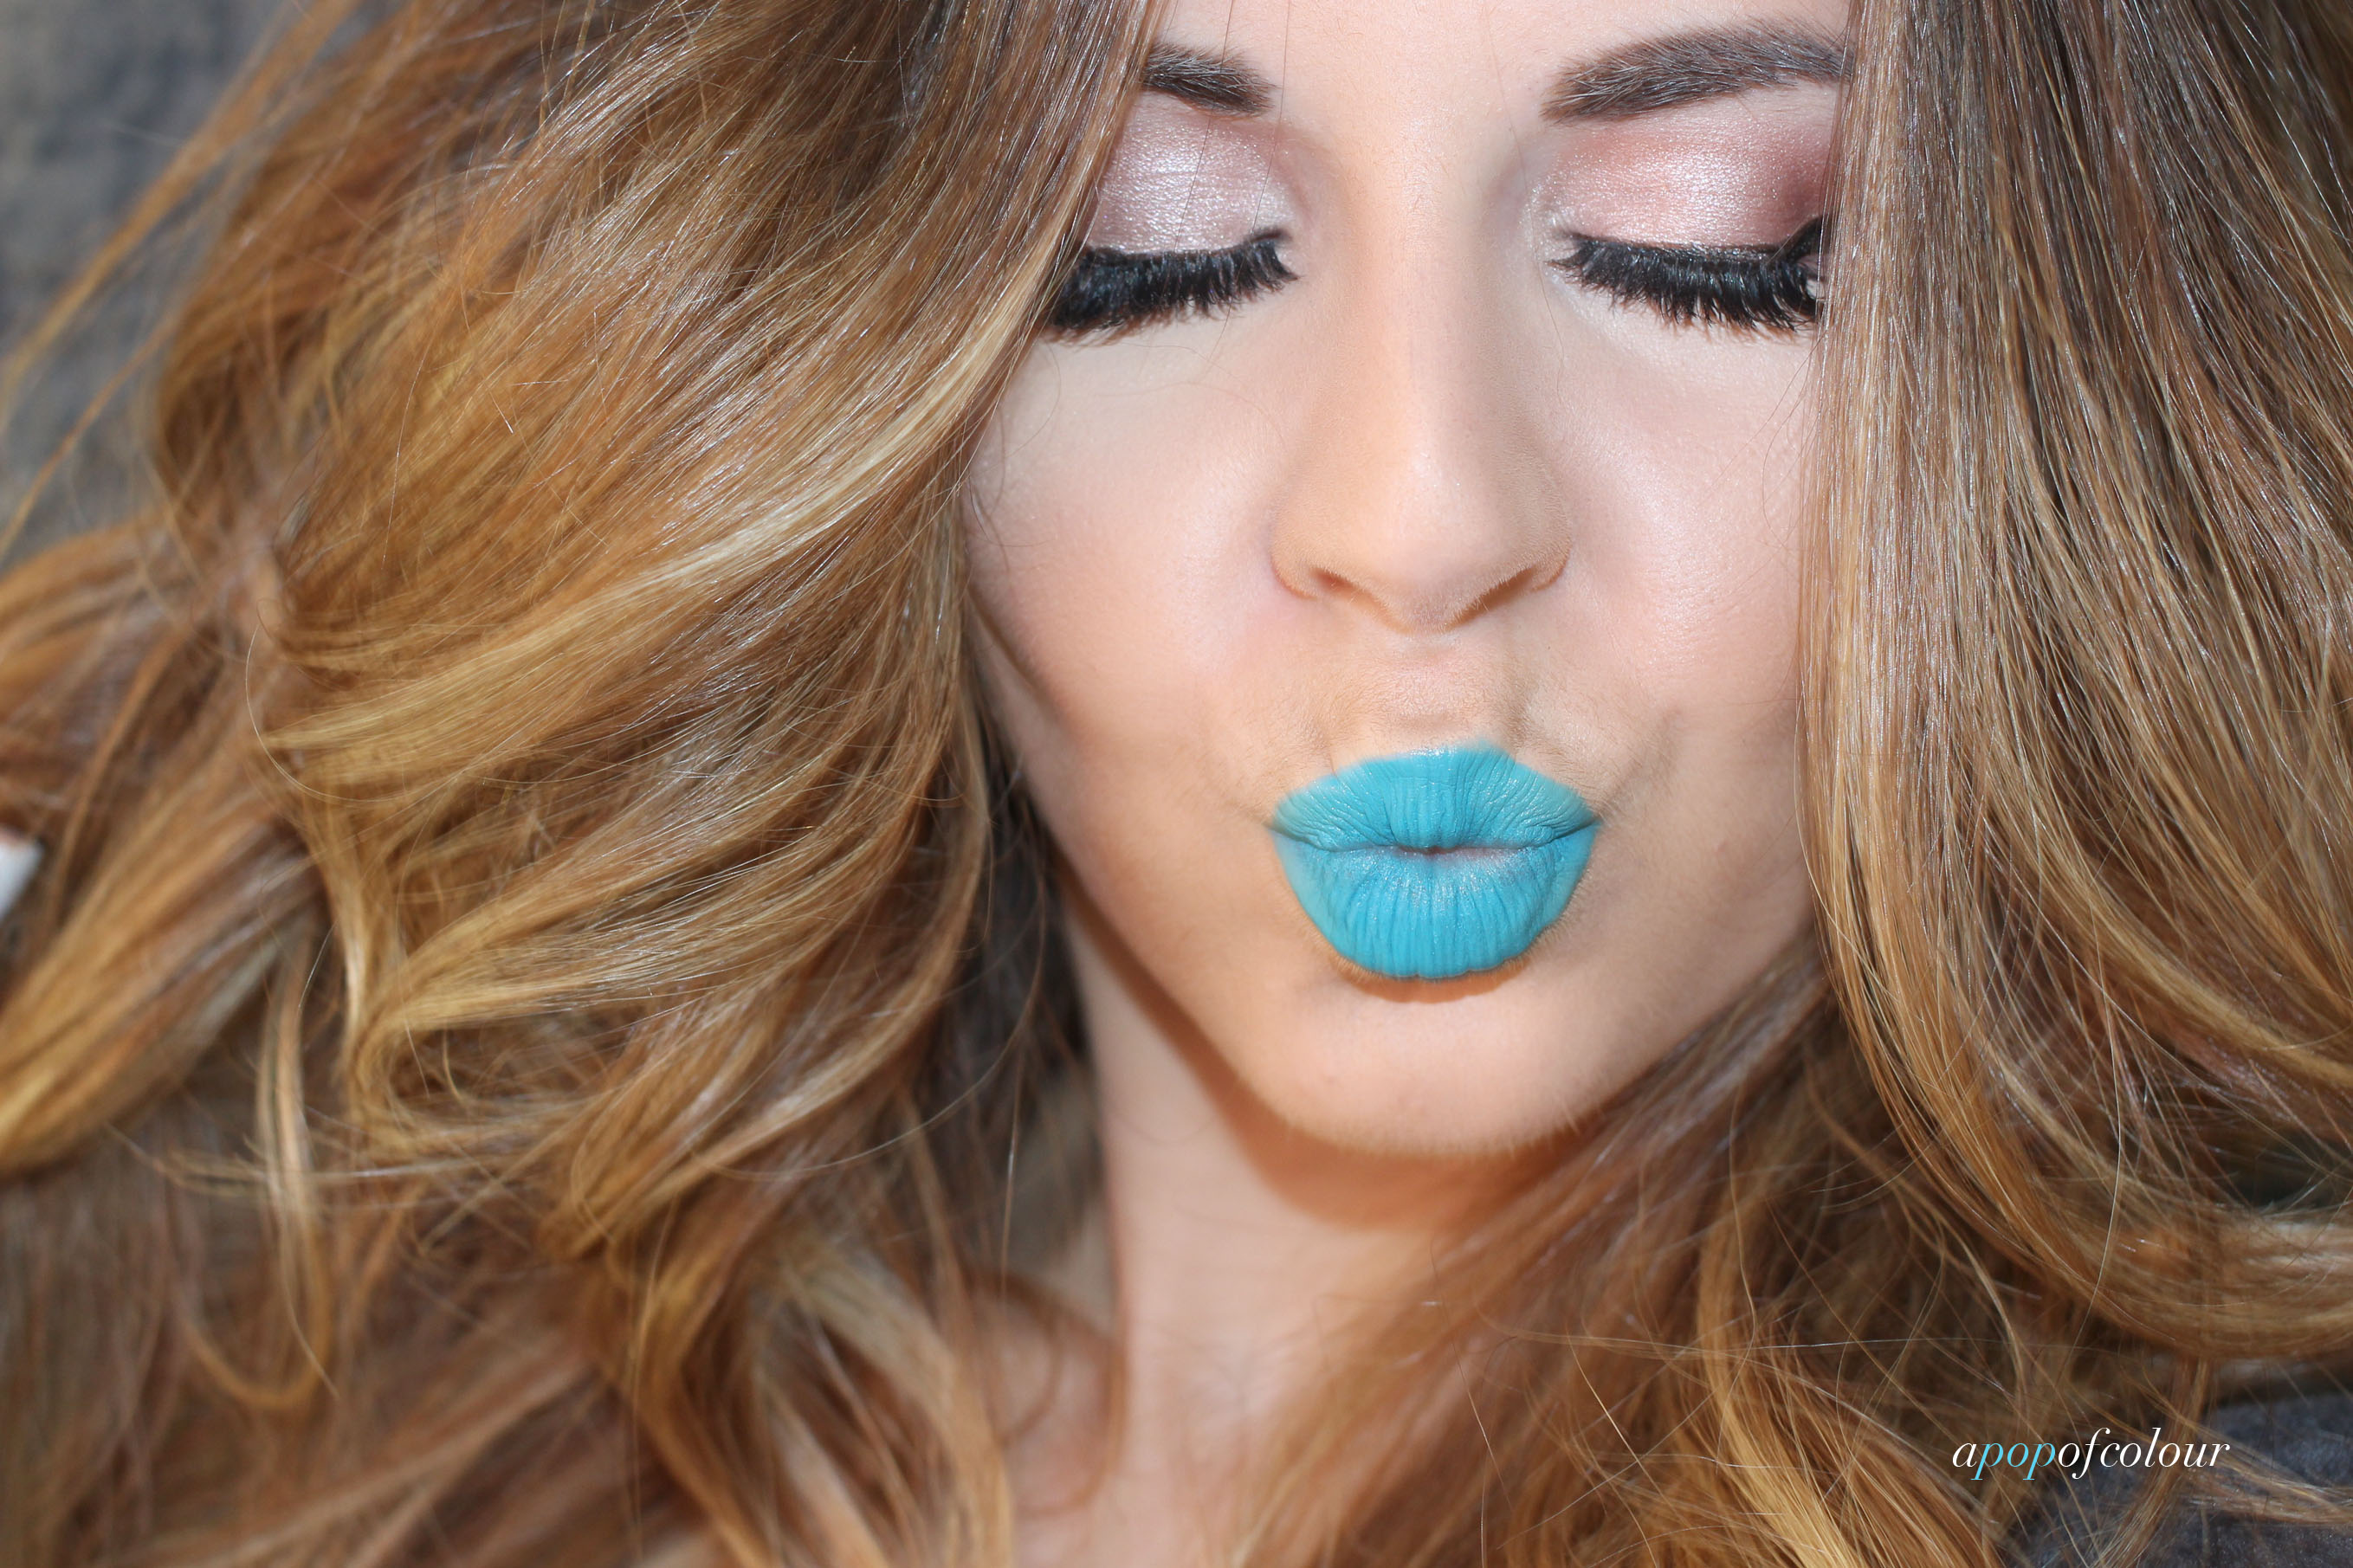 Feeling blue... How to wear blue lipstick - A Pop of Colour